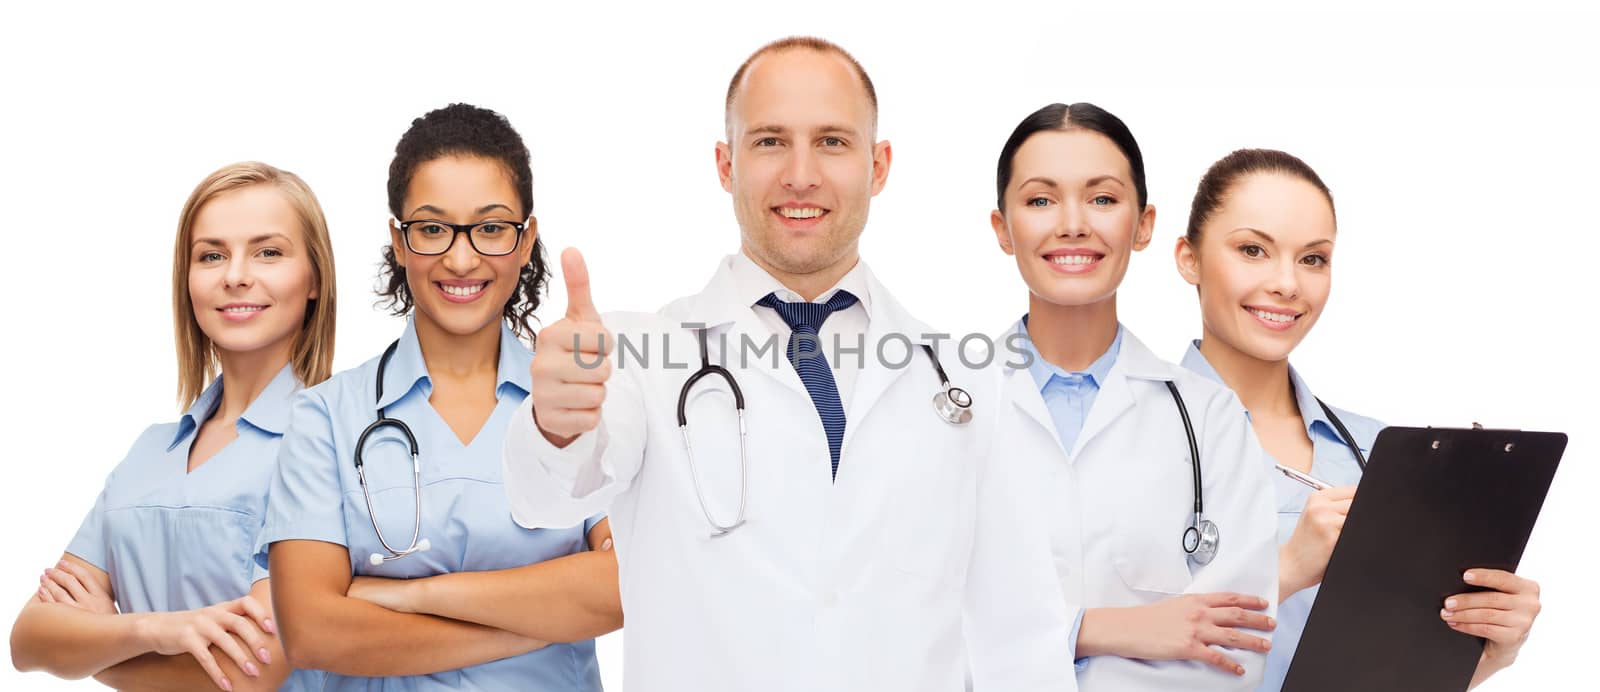 group of smiling doctors with showing thumbs up by dolgachov